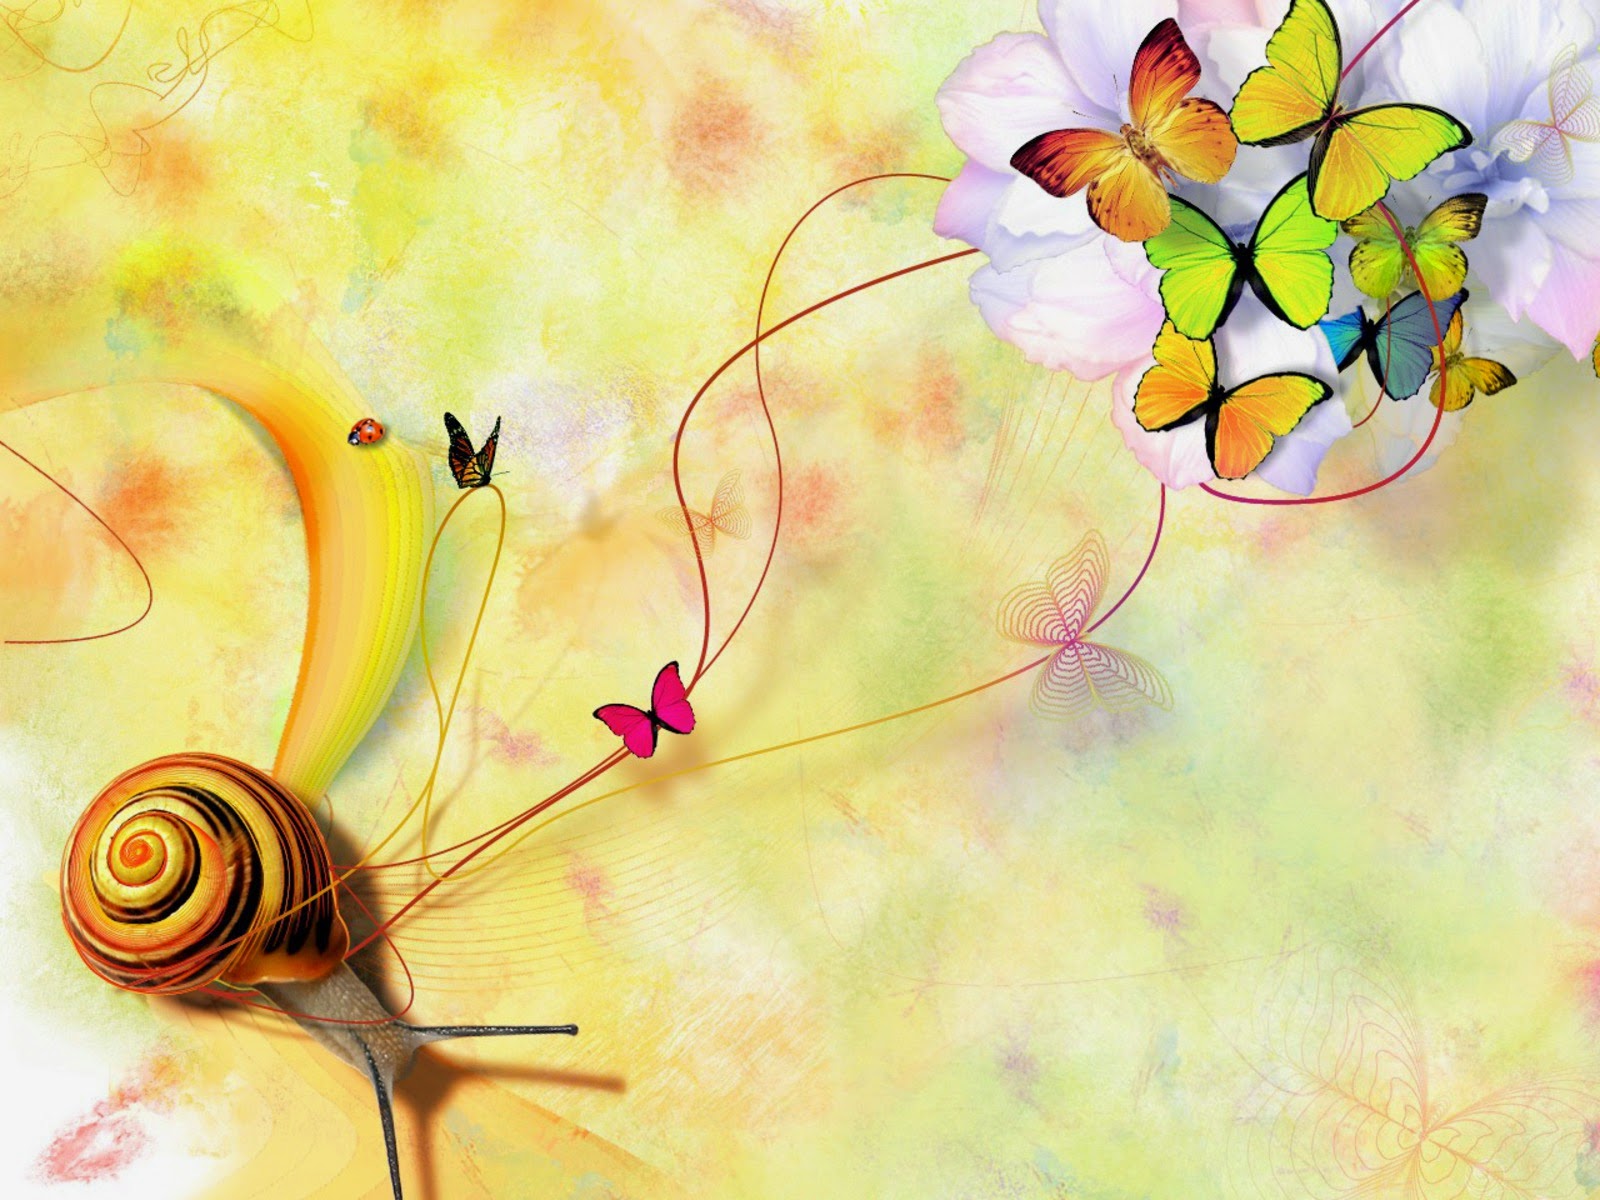 Colorful Butterfly designs background for desktop Abstract